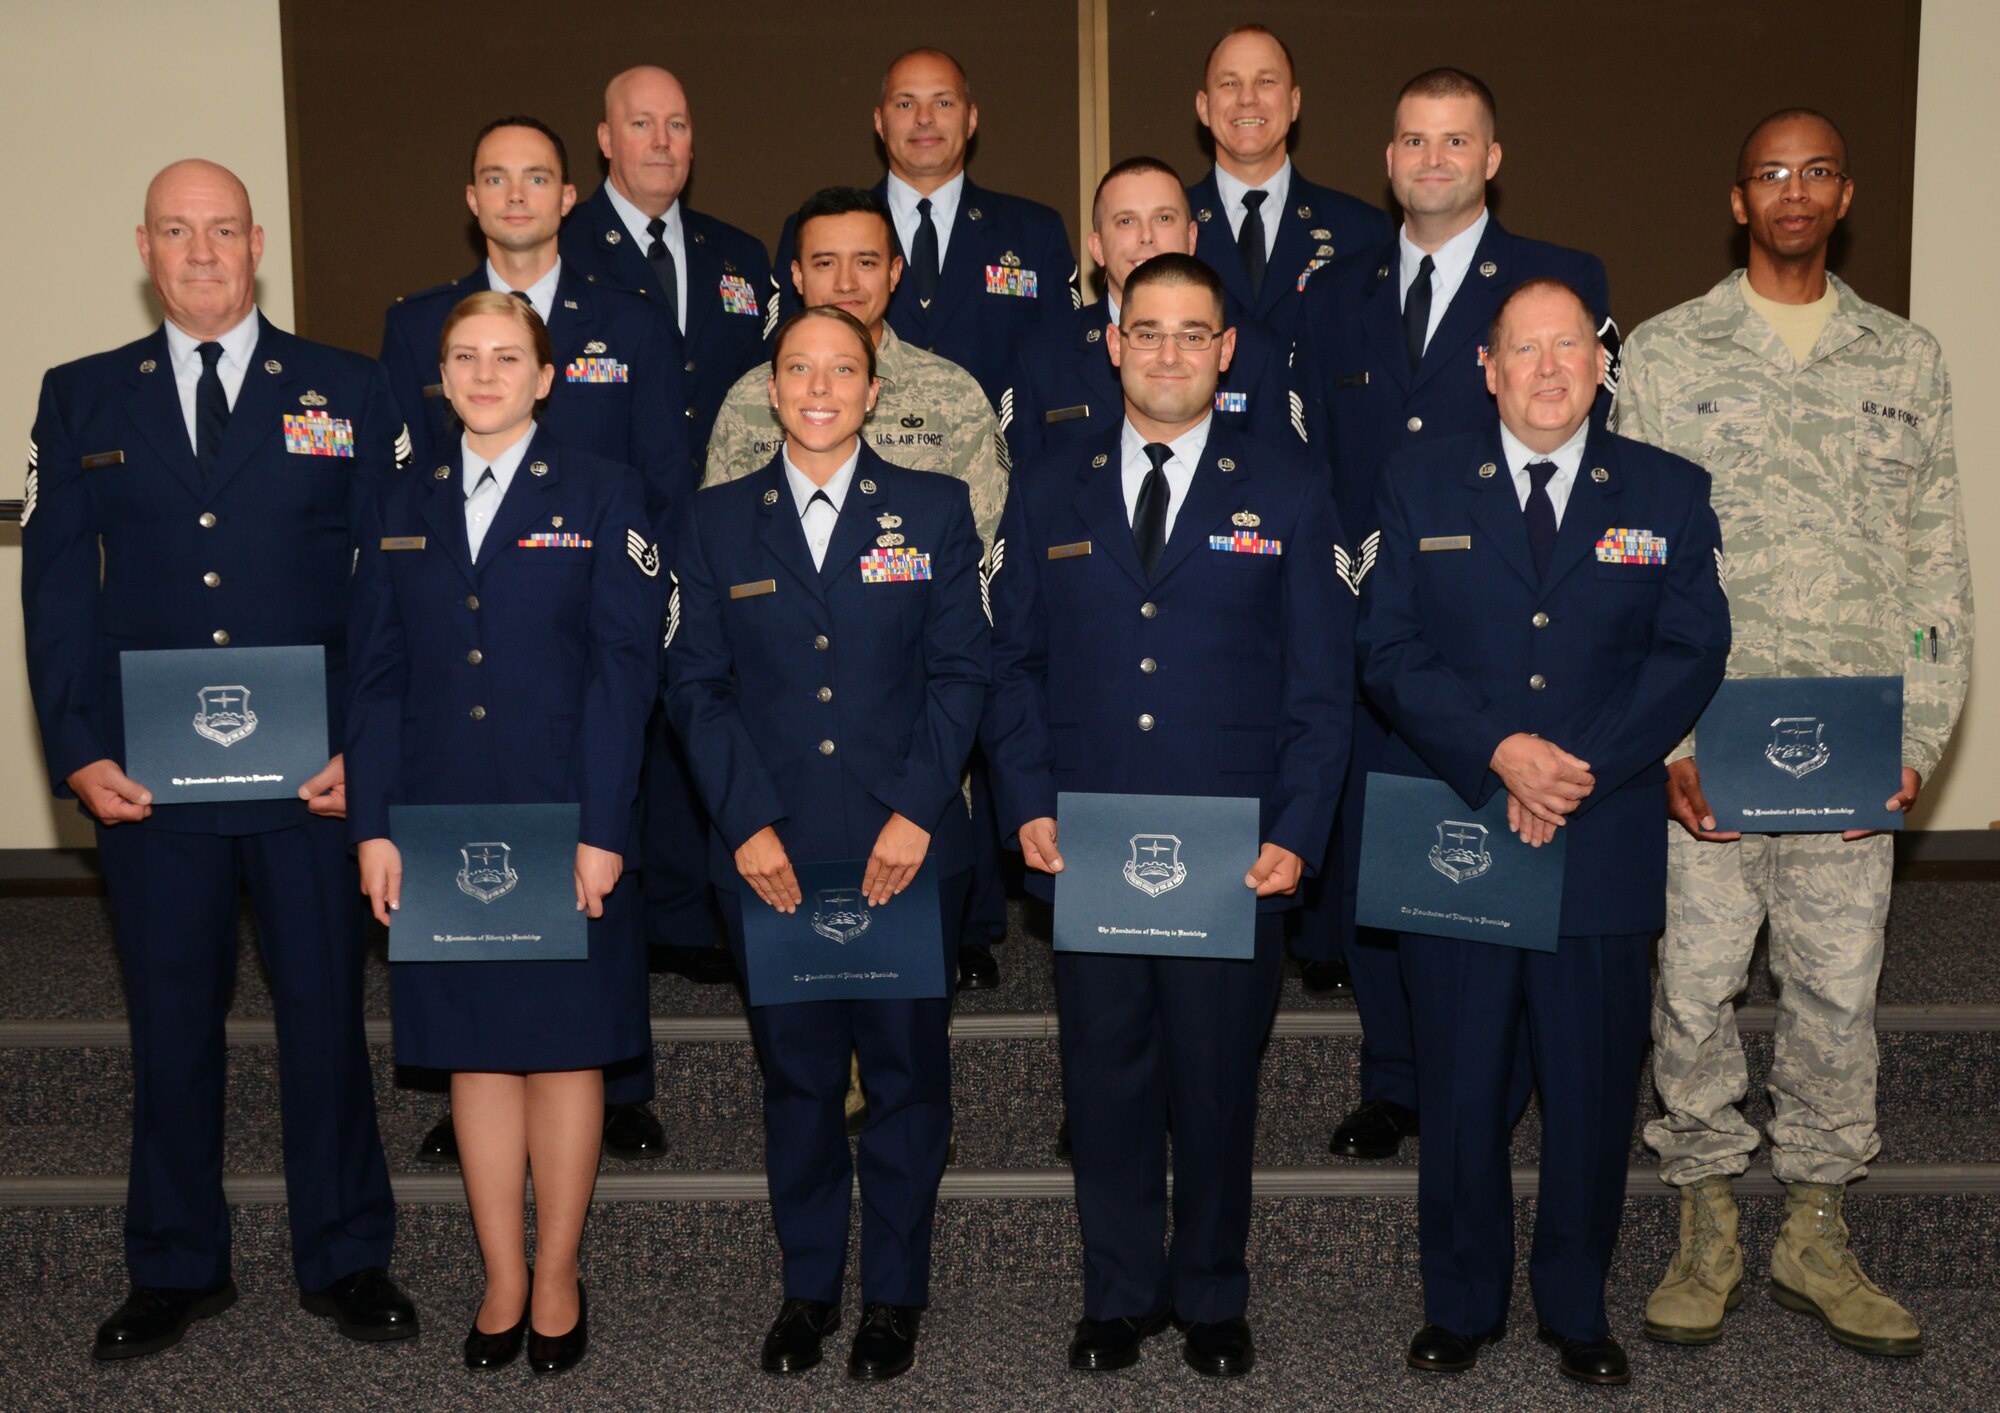 Members of the 103rd Airlift Wing receive their associate’s degrees in various fields during the Community College of the Air Force commencement held on Aug. 3, 2014, at Bradley Air National Guard Base, East Granby, Conn. The CCAF is now a requirement for enlisted Airmen to become a Senior Master Sgt. or Chief Master Sgt. (U.S. Air National Guard photo by Senior Airman Jennifer Pierce/Released)